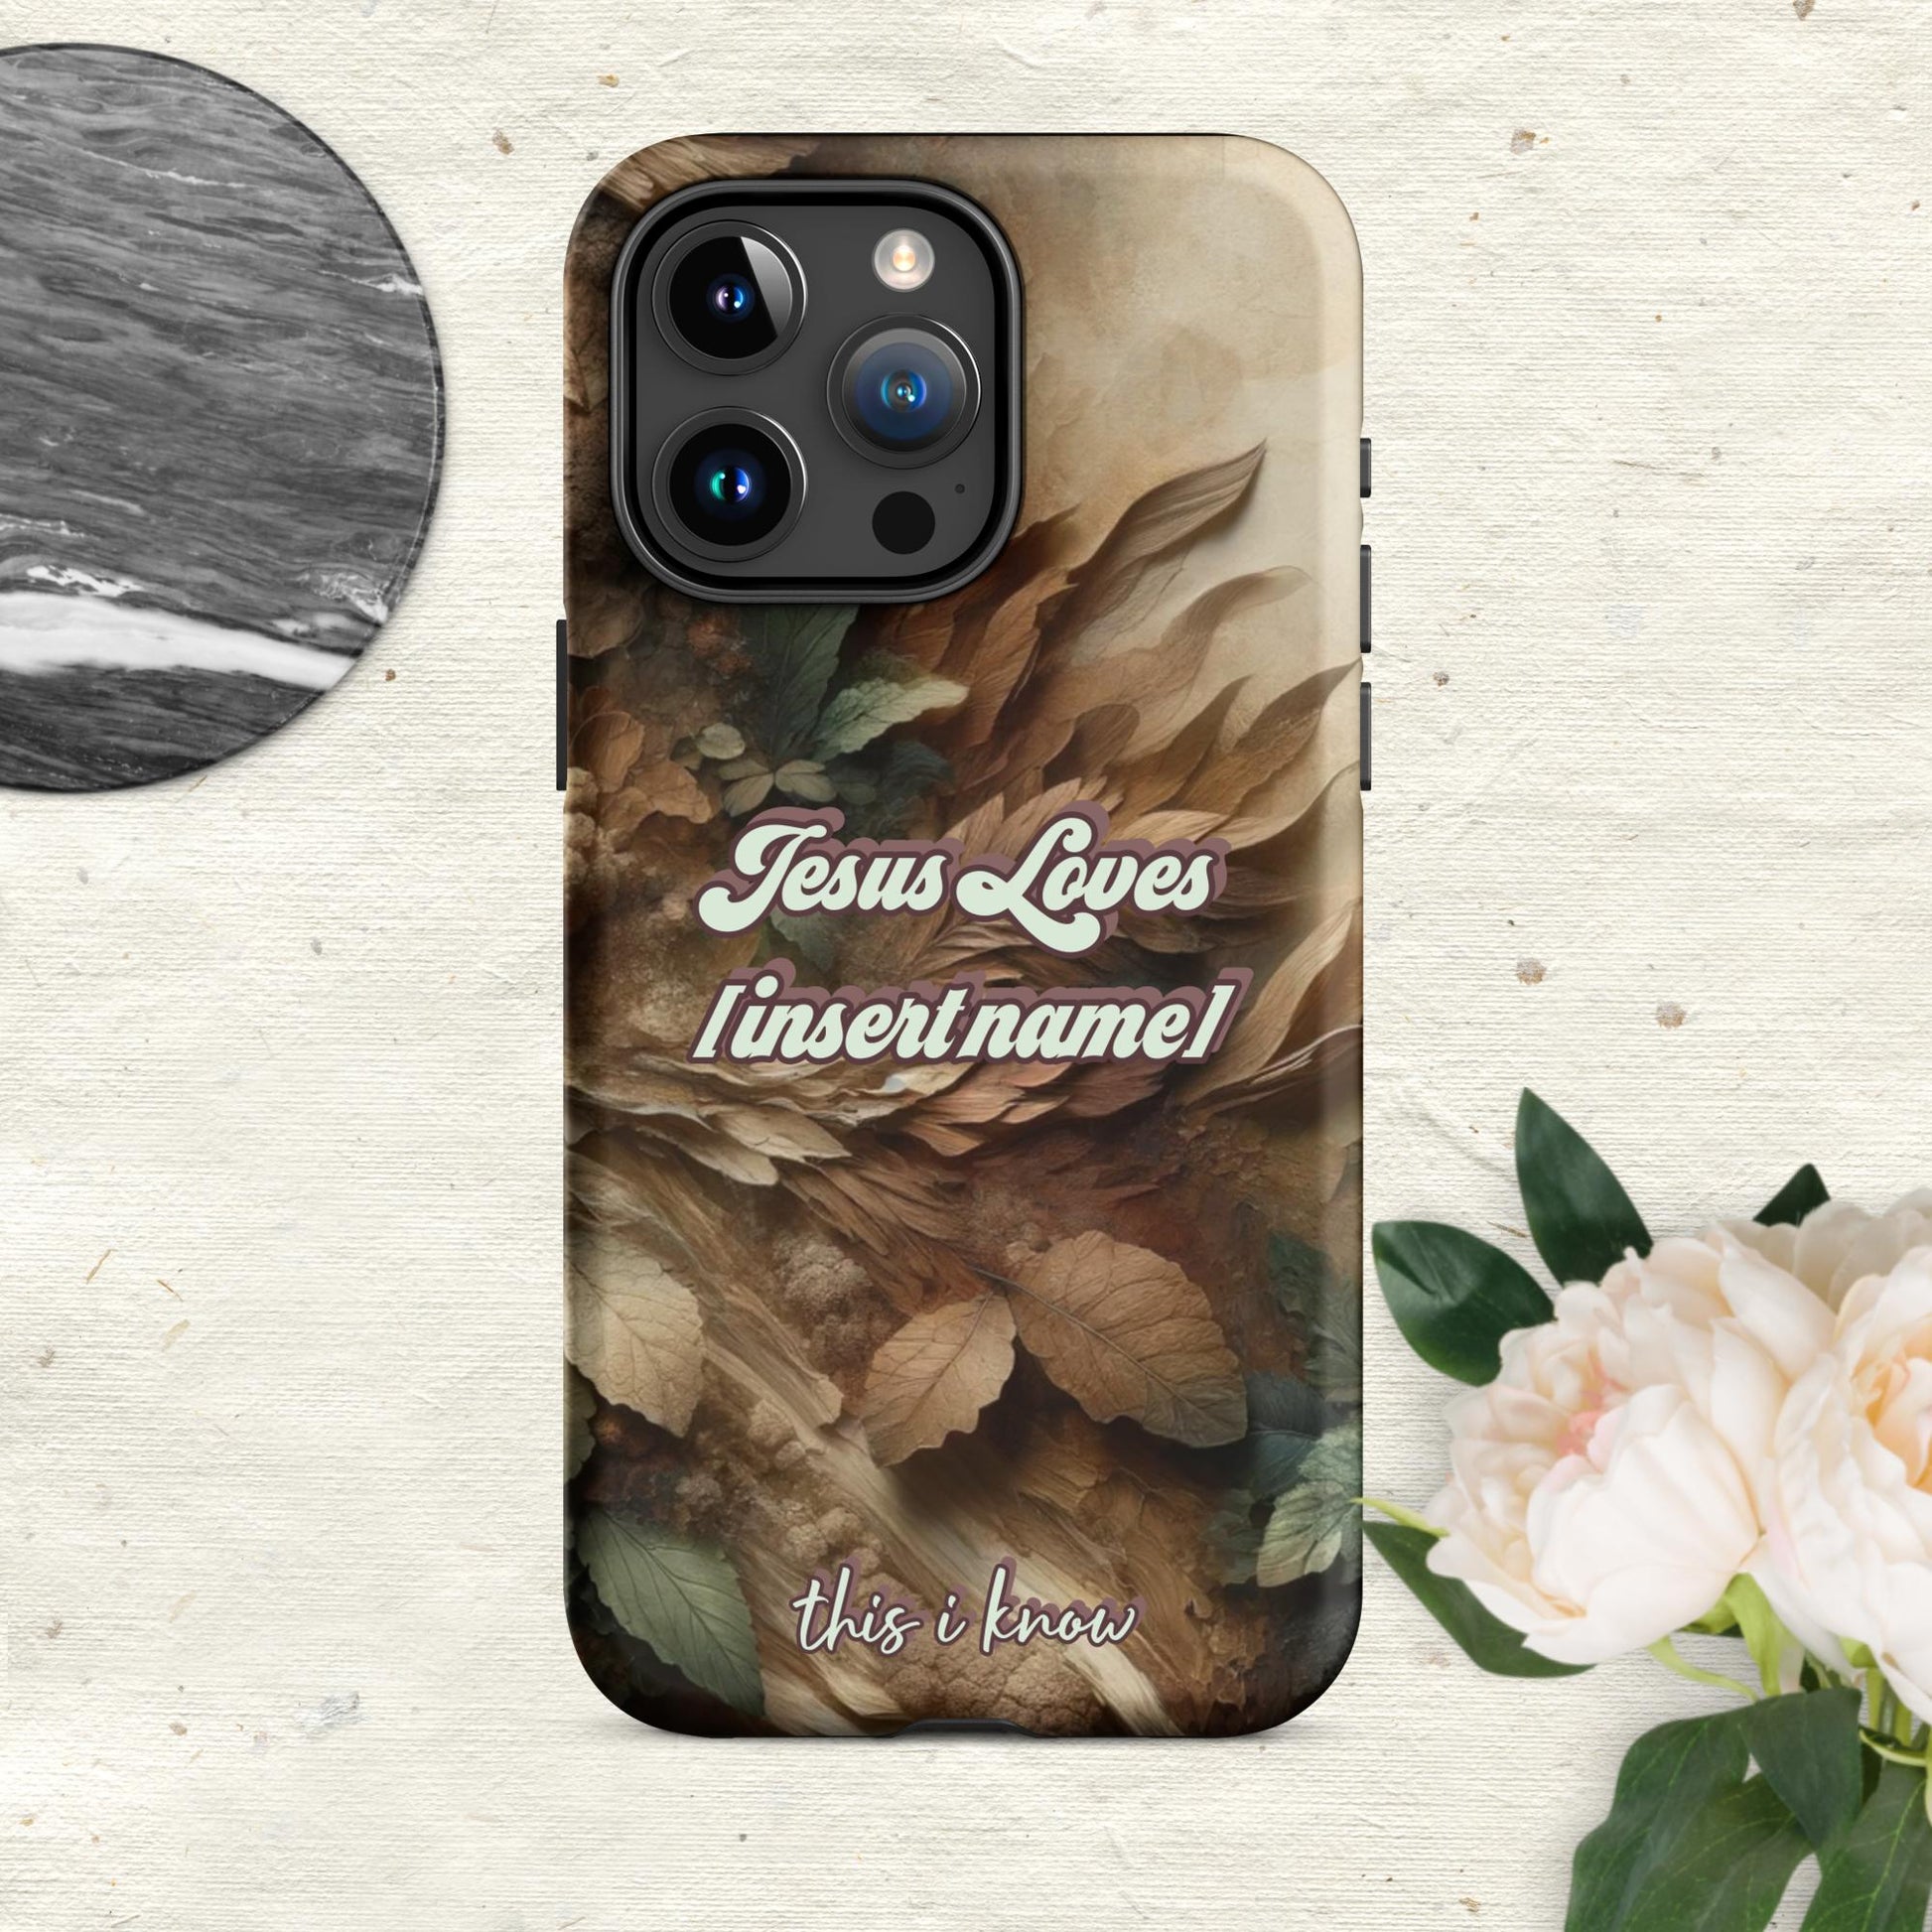 Trendyguard Matte / iPhone 15 Pro Max Jesus Loves [insertname] This I Know | Custom Tough Case for iPhone®